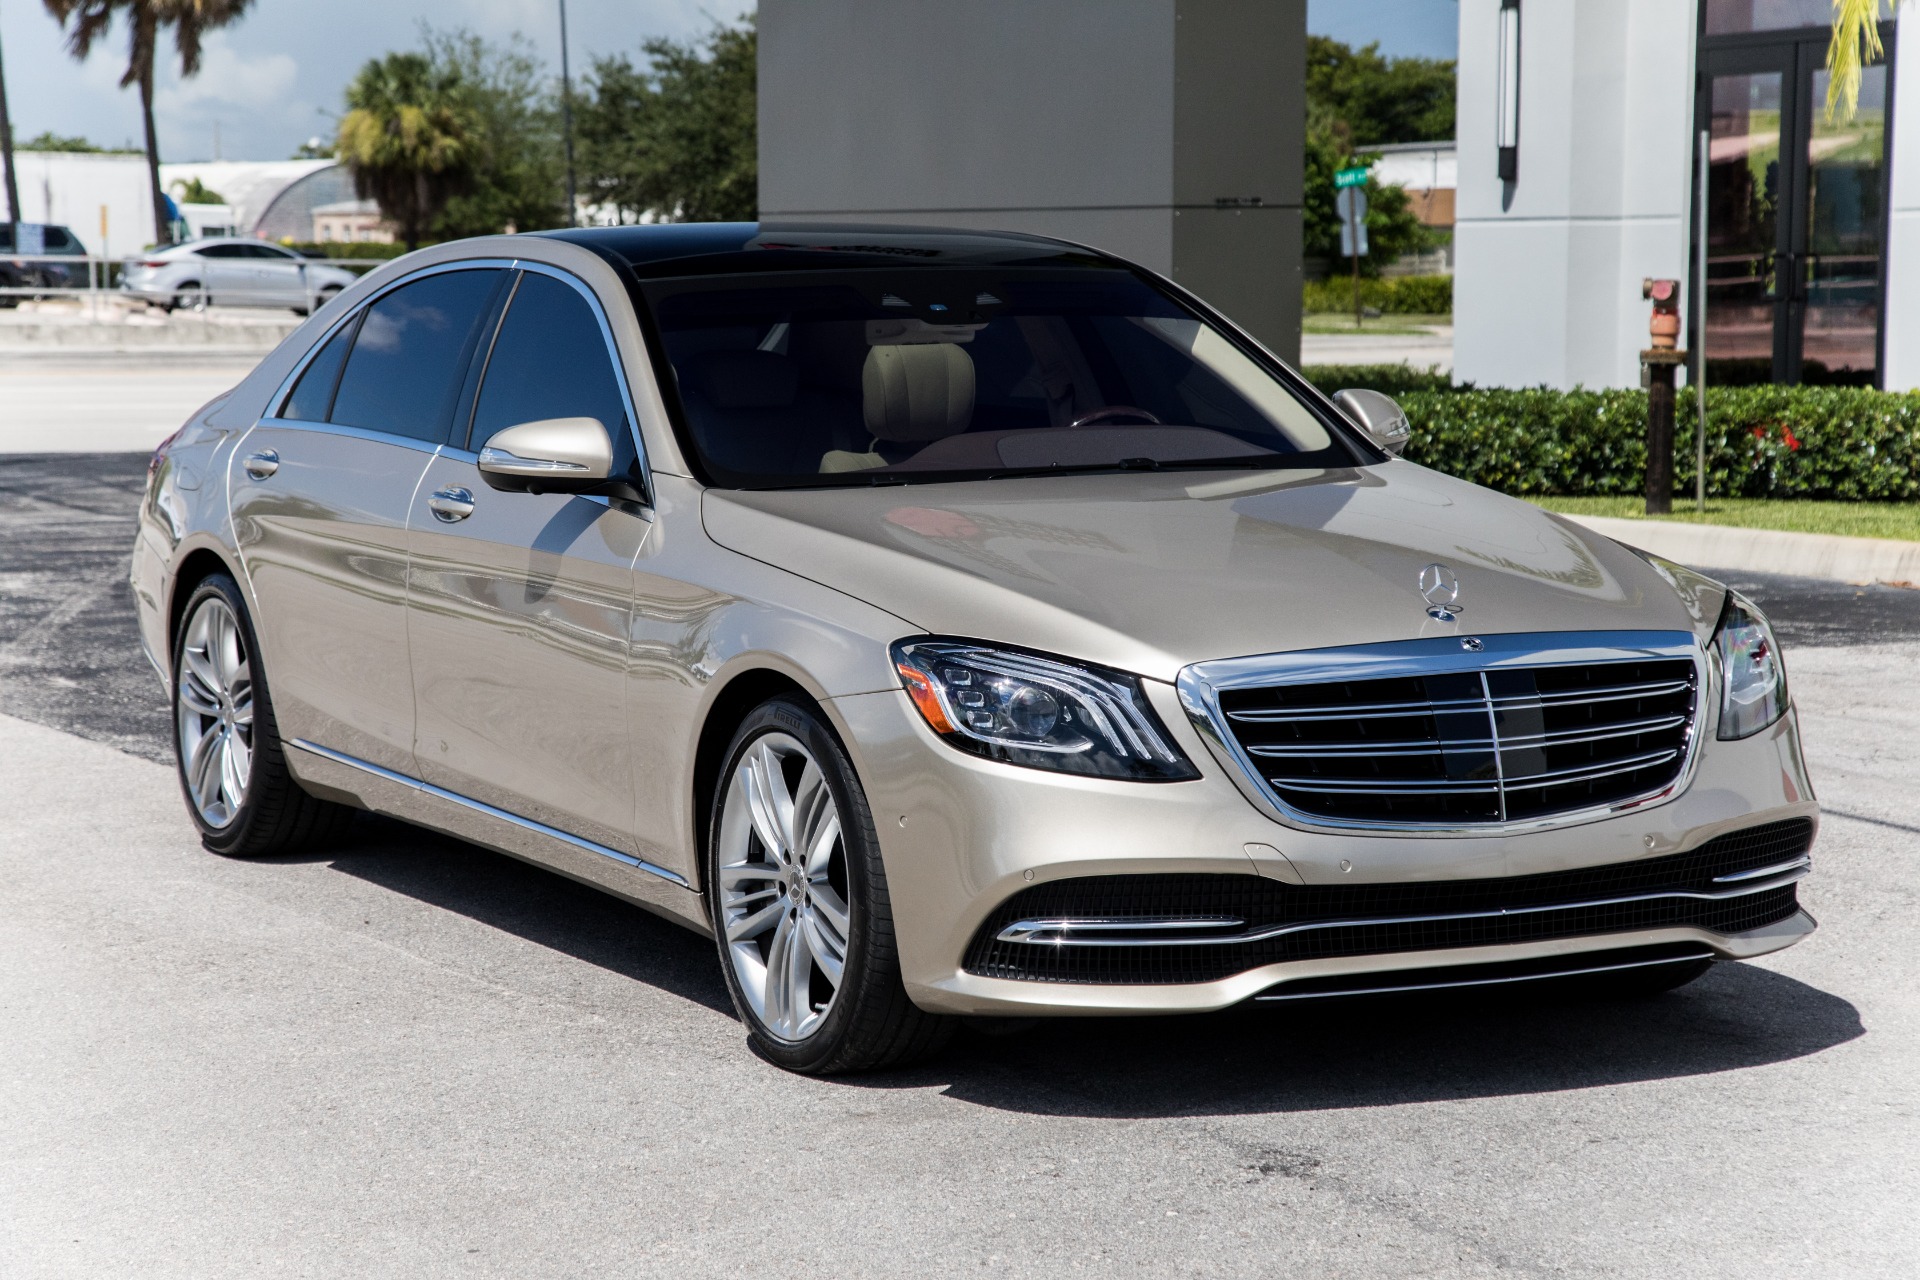 Used 2019 MercedesBenz SClass S 560 For Sale (94,900